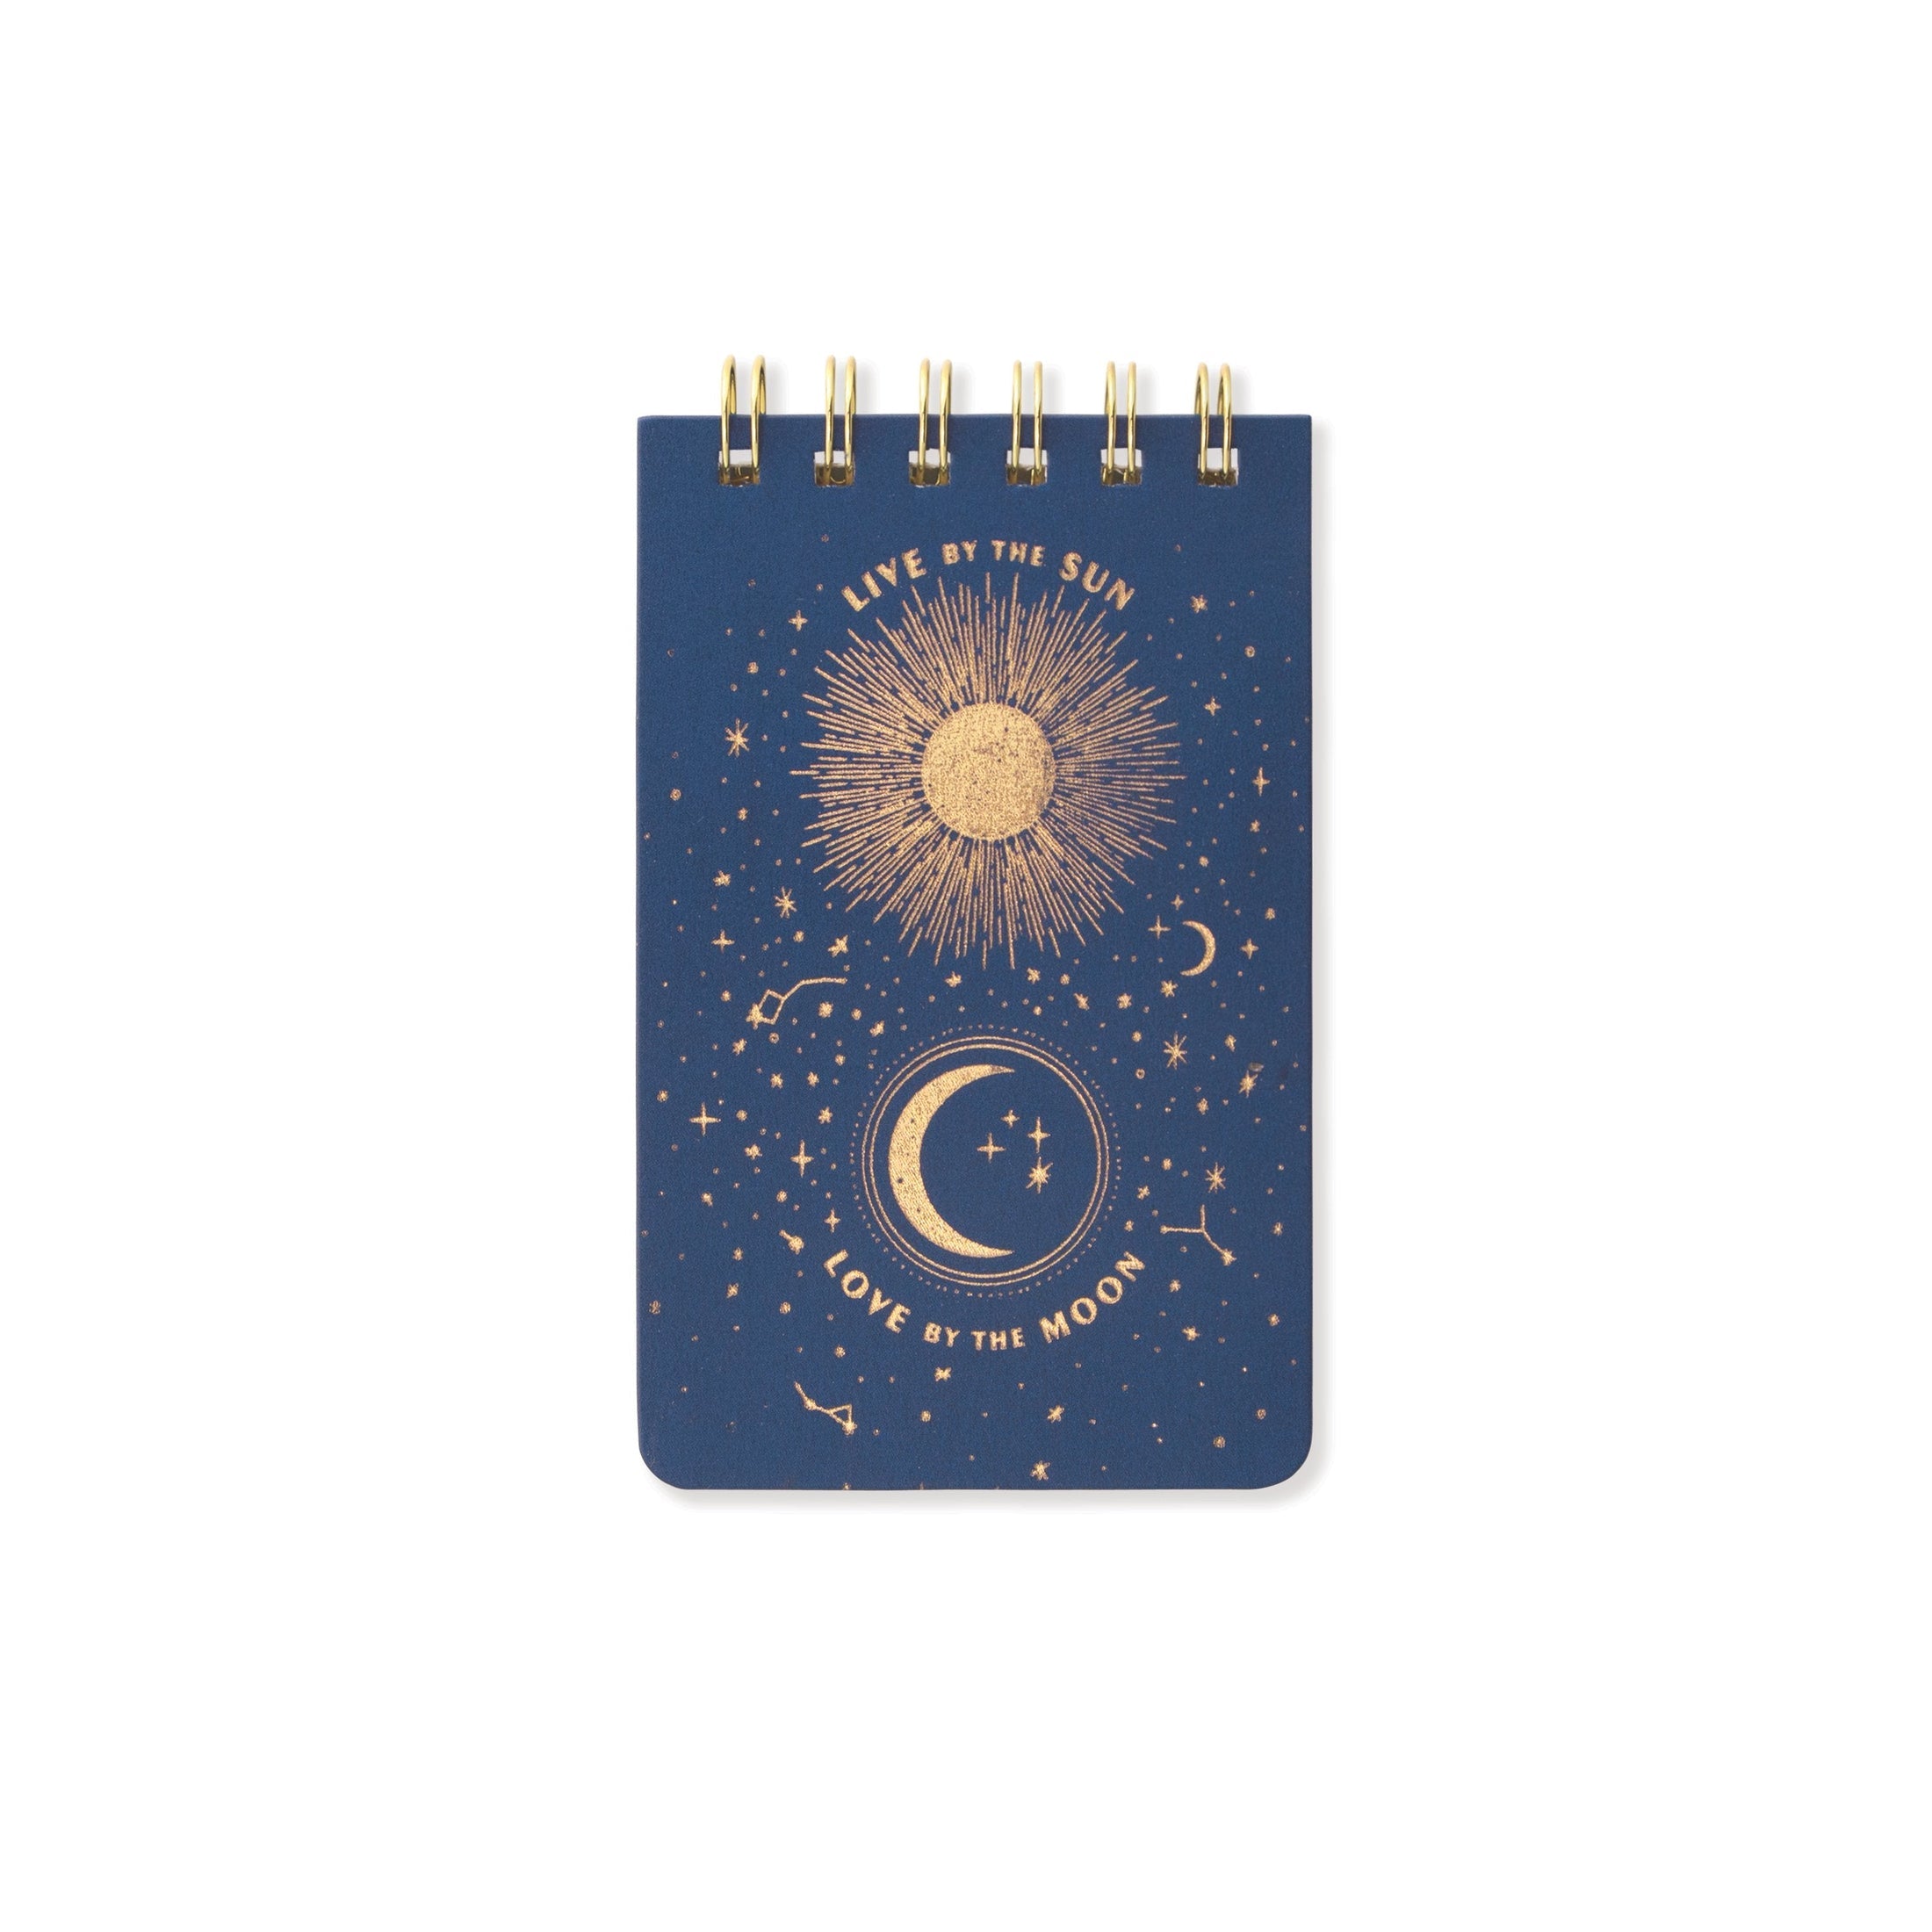 Cloth Covered Notepad - "Live By The Sun"